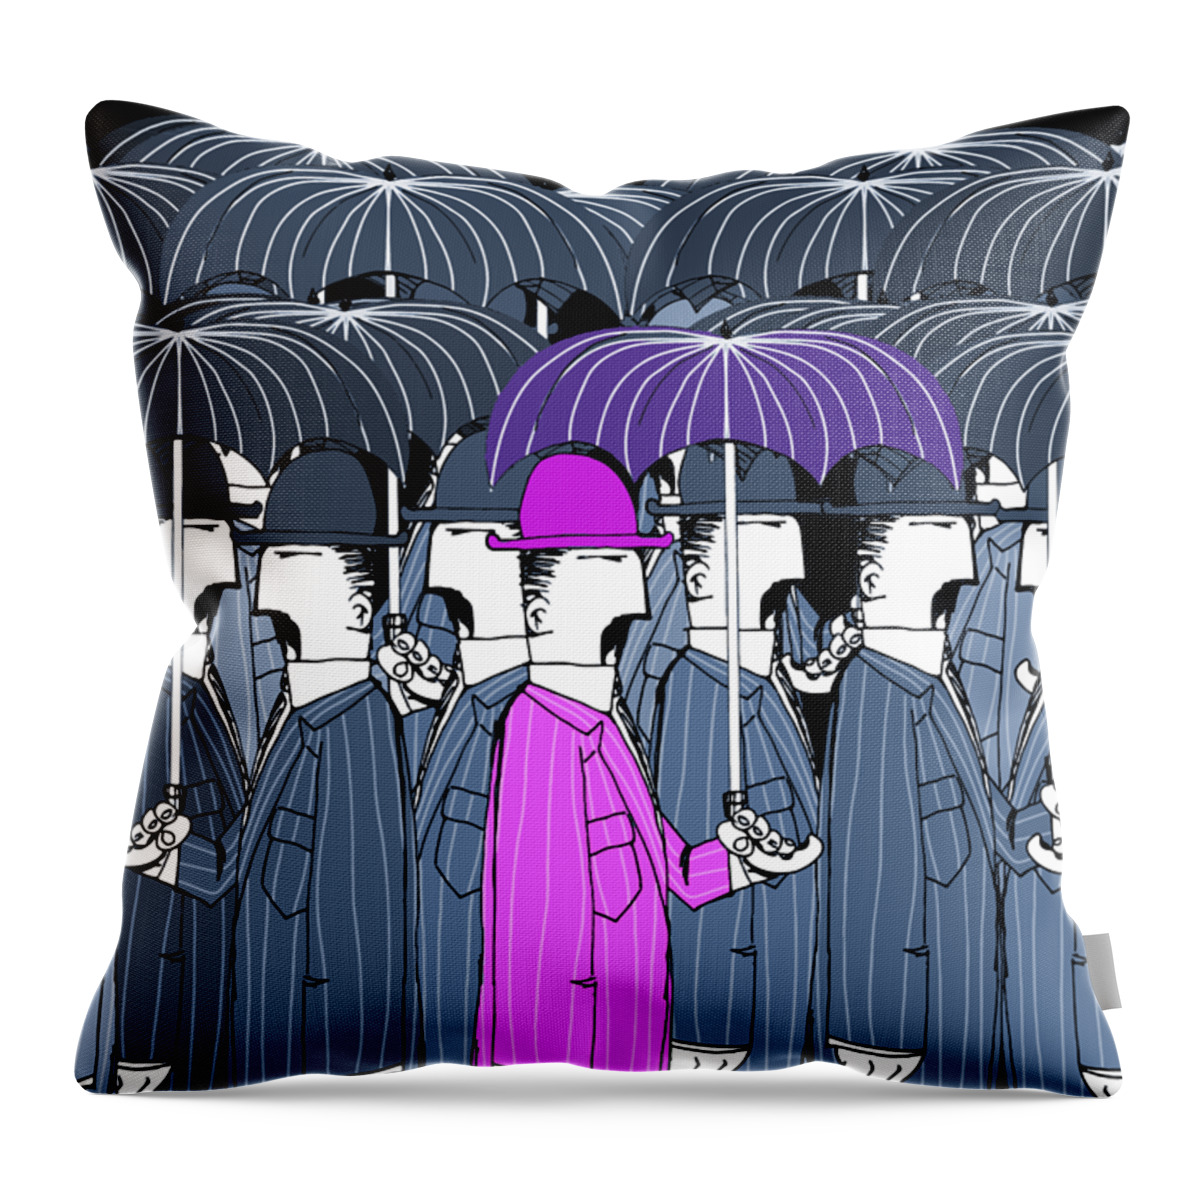 Parasol Throw Pillow featuring the digital art Parasol Party by Piotr Dulski